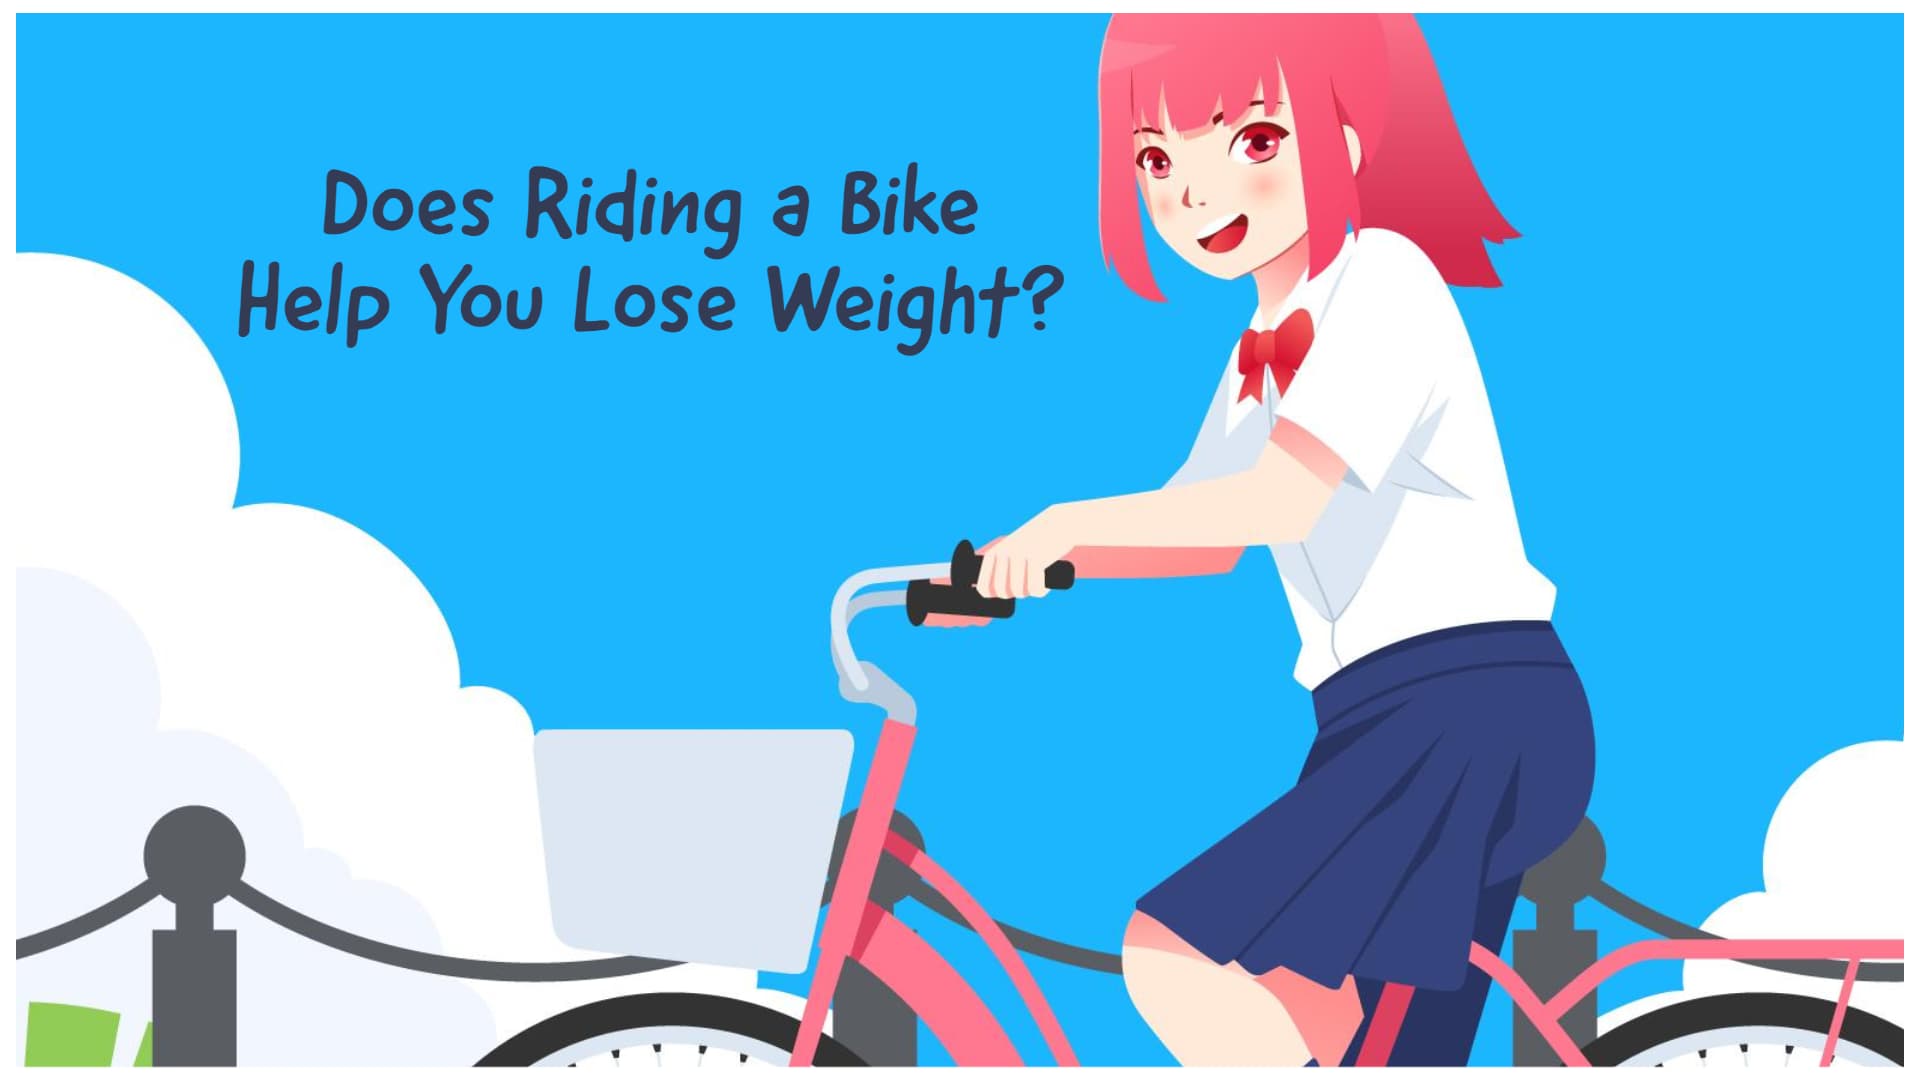 Does Riding a Bike Help You Lose Weight?, express wellness, Health & Fitness, Lose Weight, Riding a Bike, ultimate guide, wellness elements